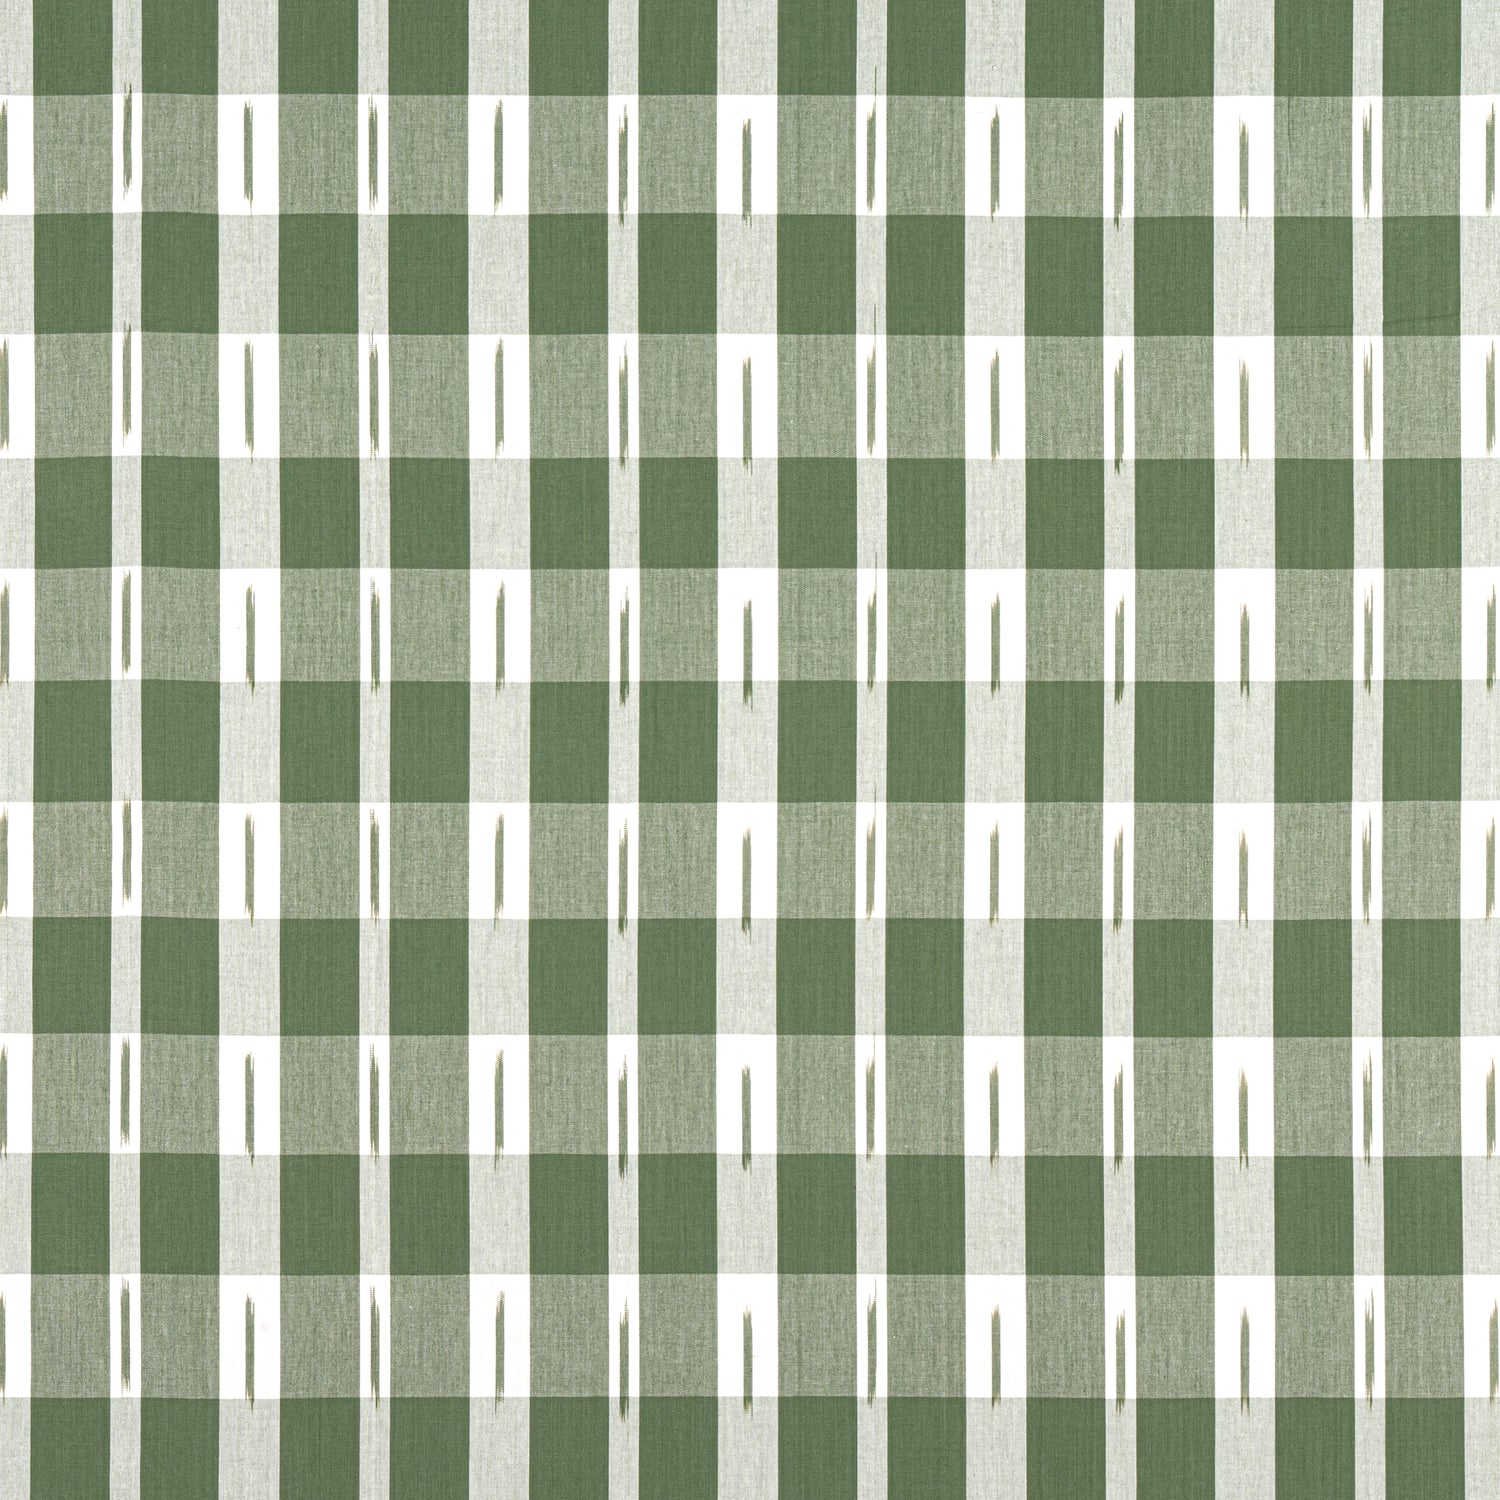 Ellastone Check fabric in green color - pattern number W736437 - by Thibaut in the Indienne collection